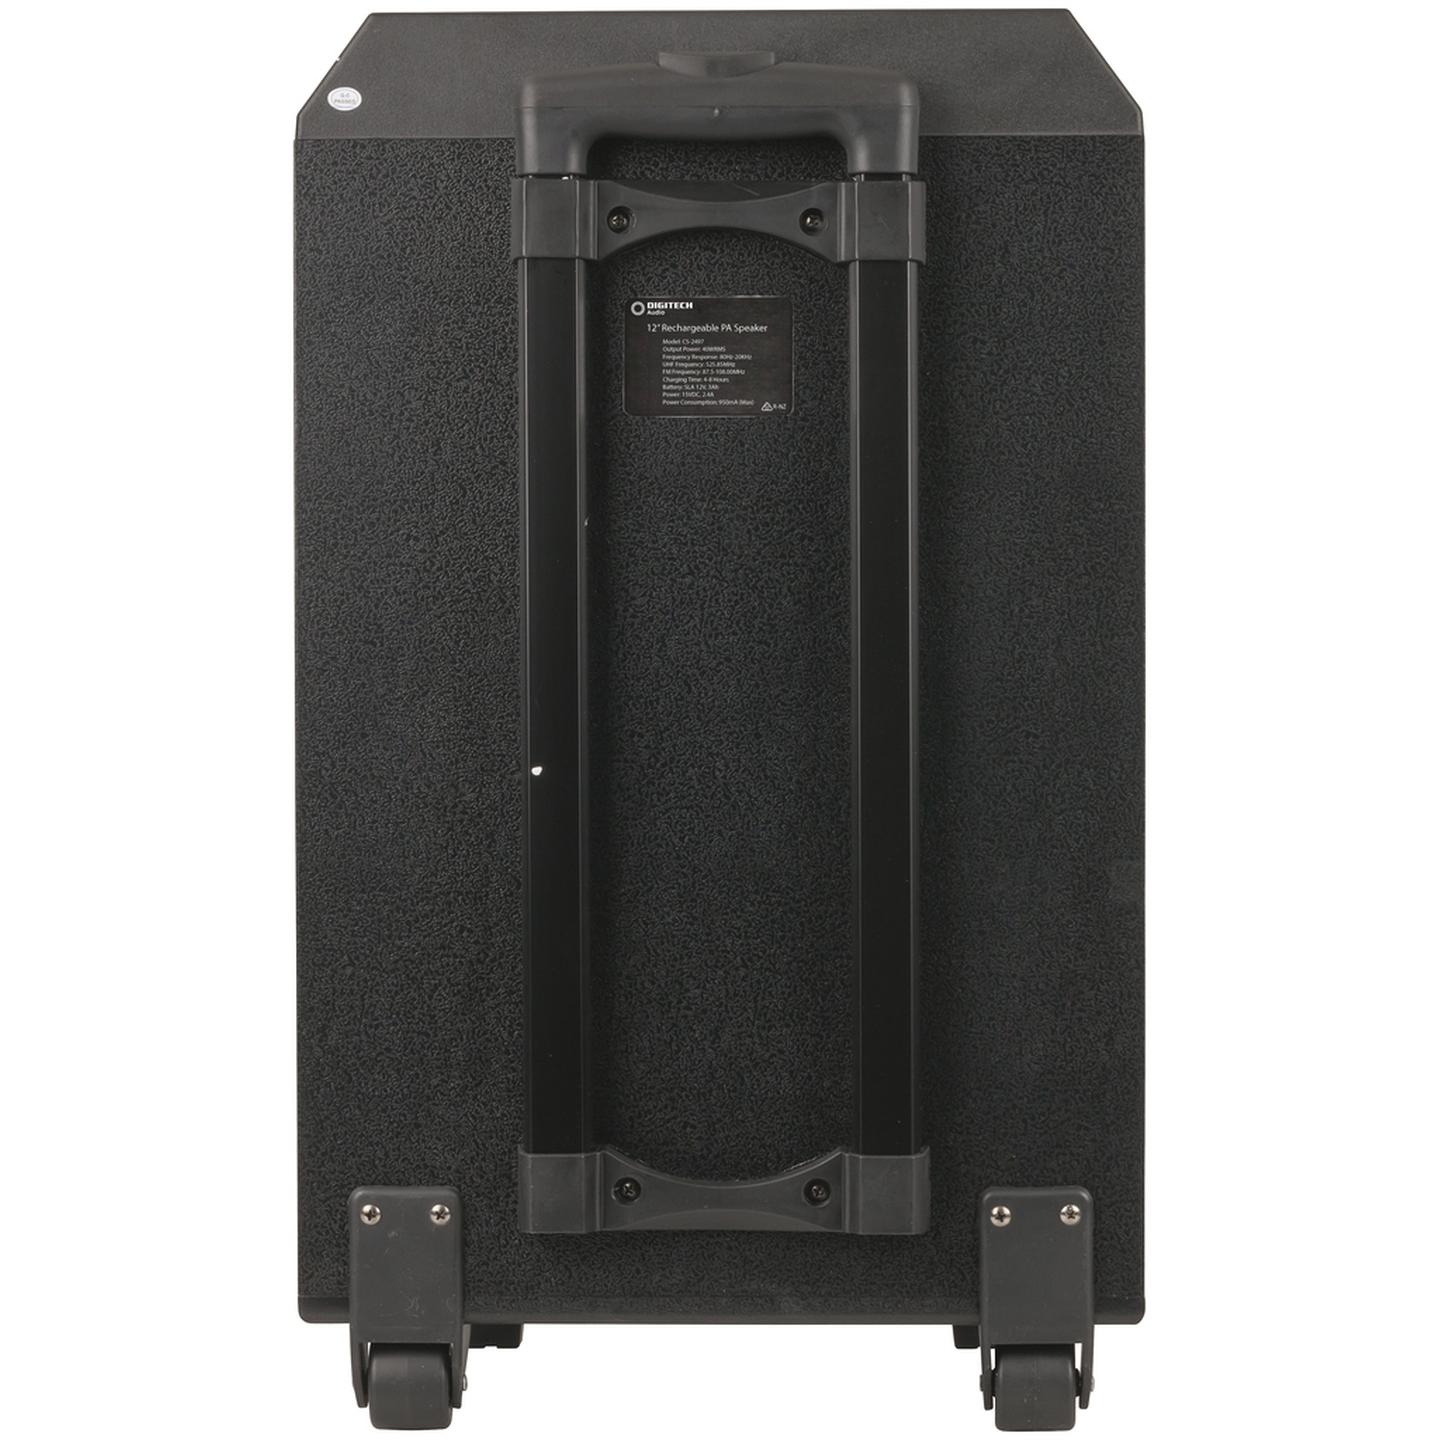 12 Inch Rechargeable PA Speaker with Wireless Microphone